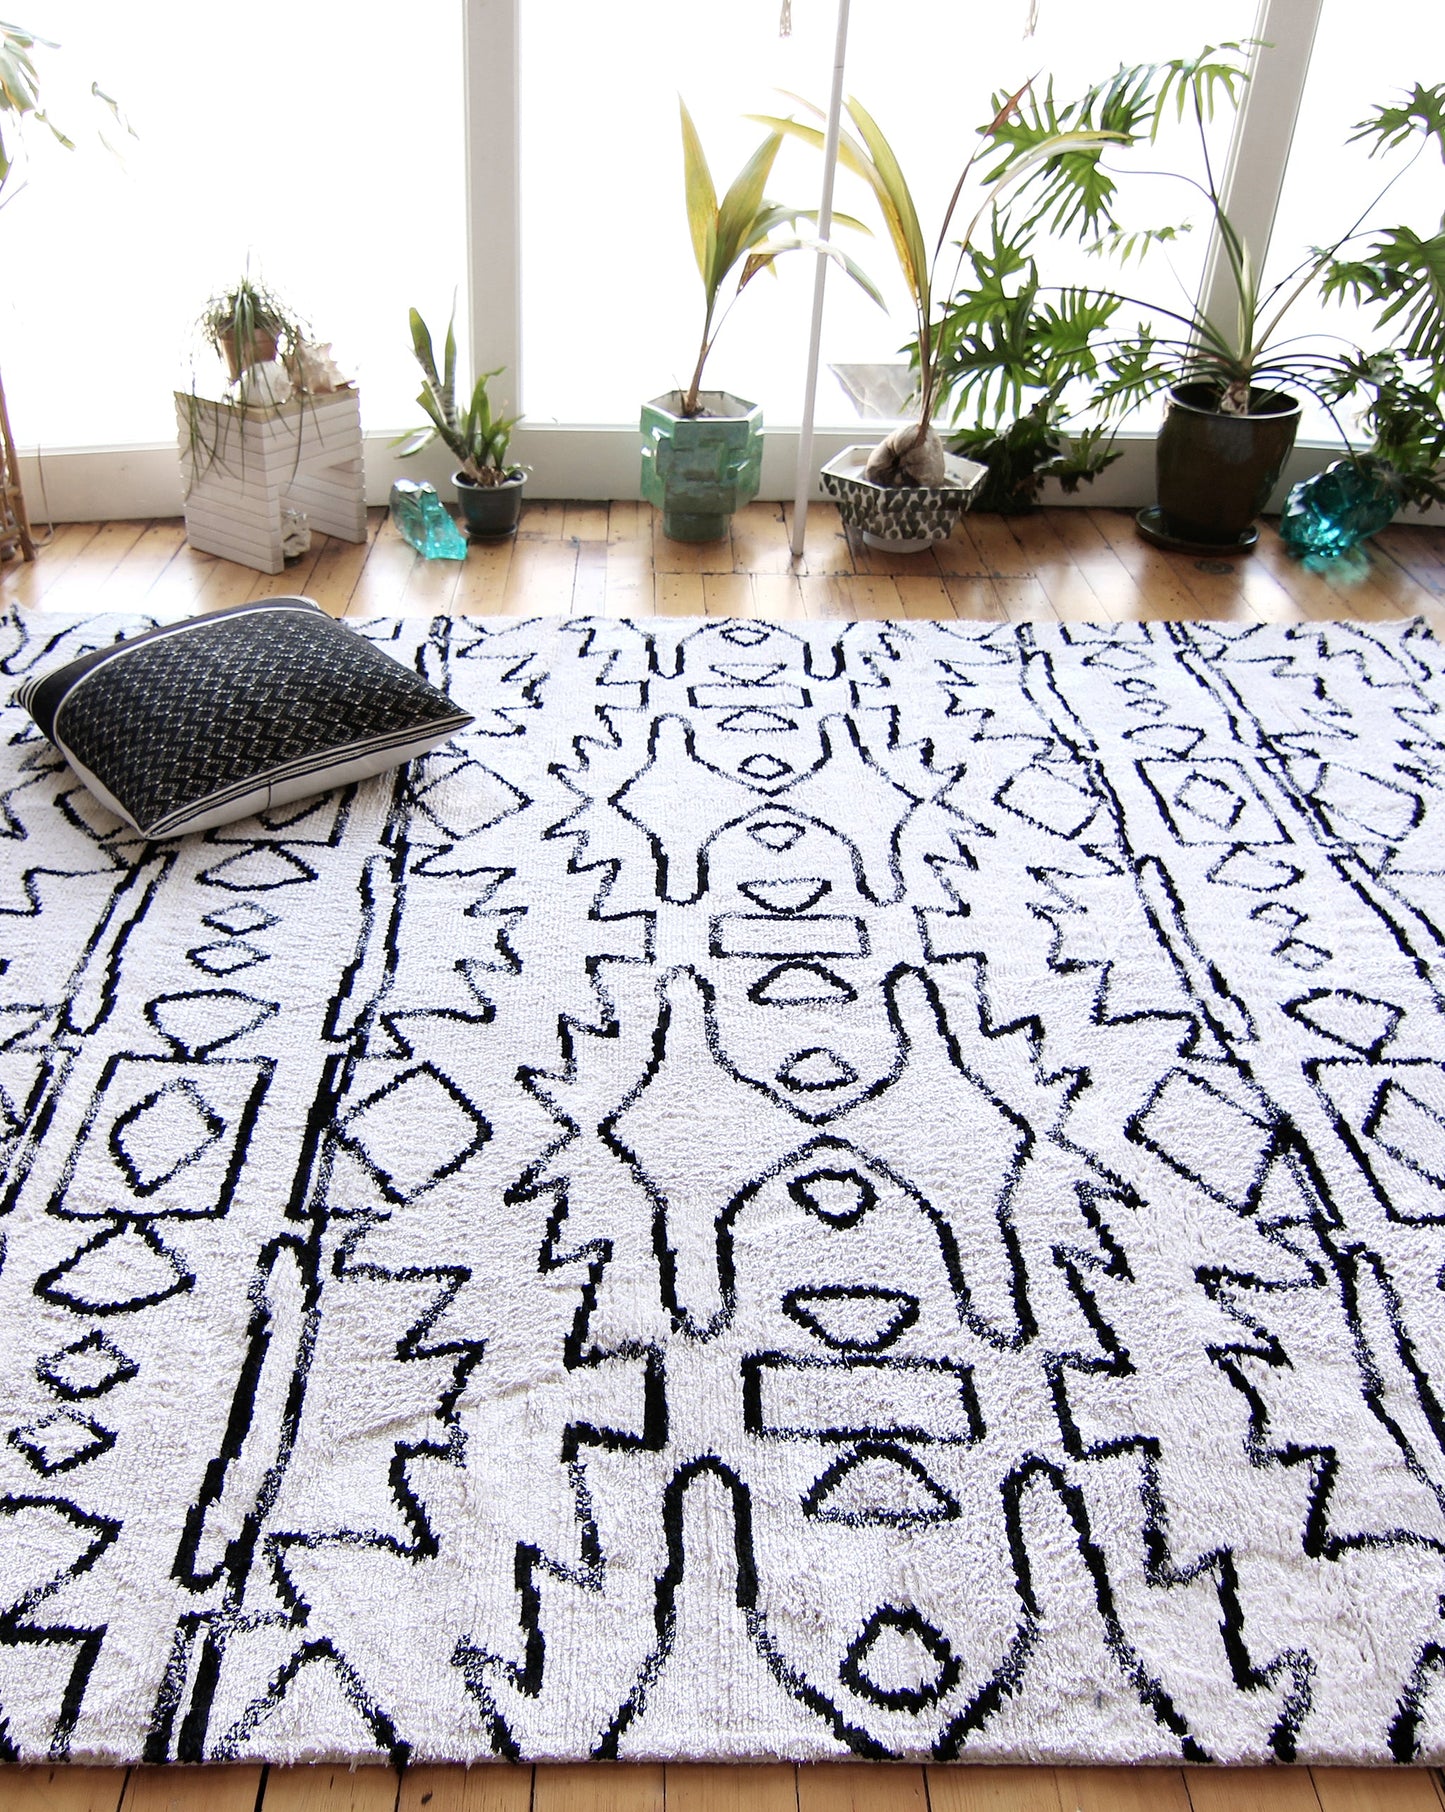 A versatile Akimbo Hand Knotted Rug Black And White with a graphic geometric pattern, placed in a room with plants